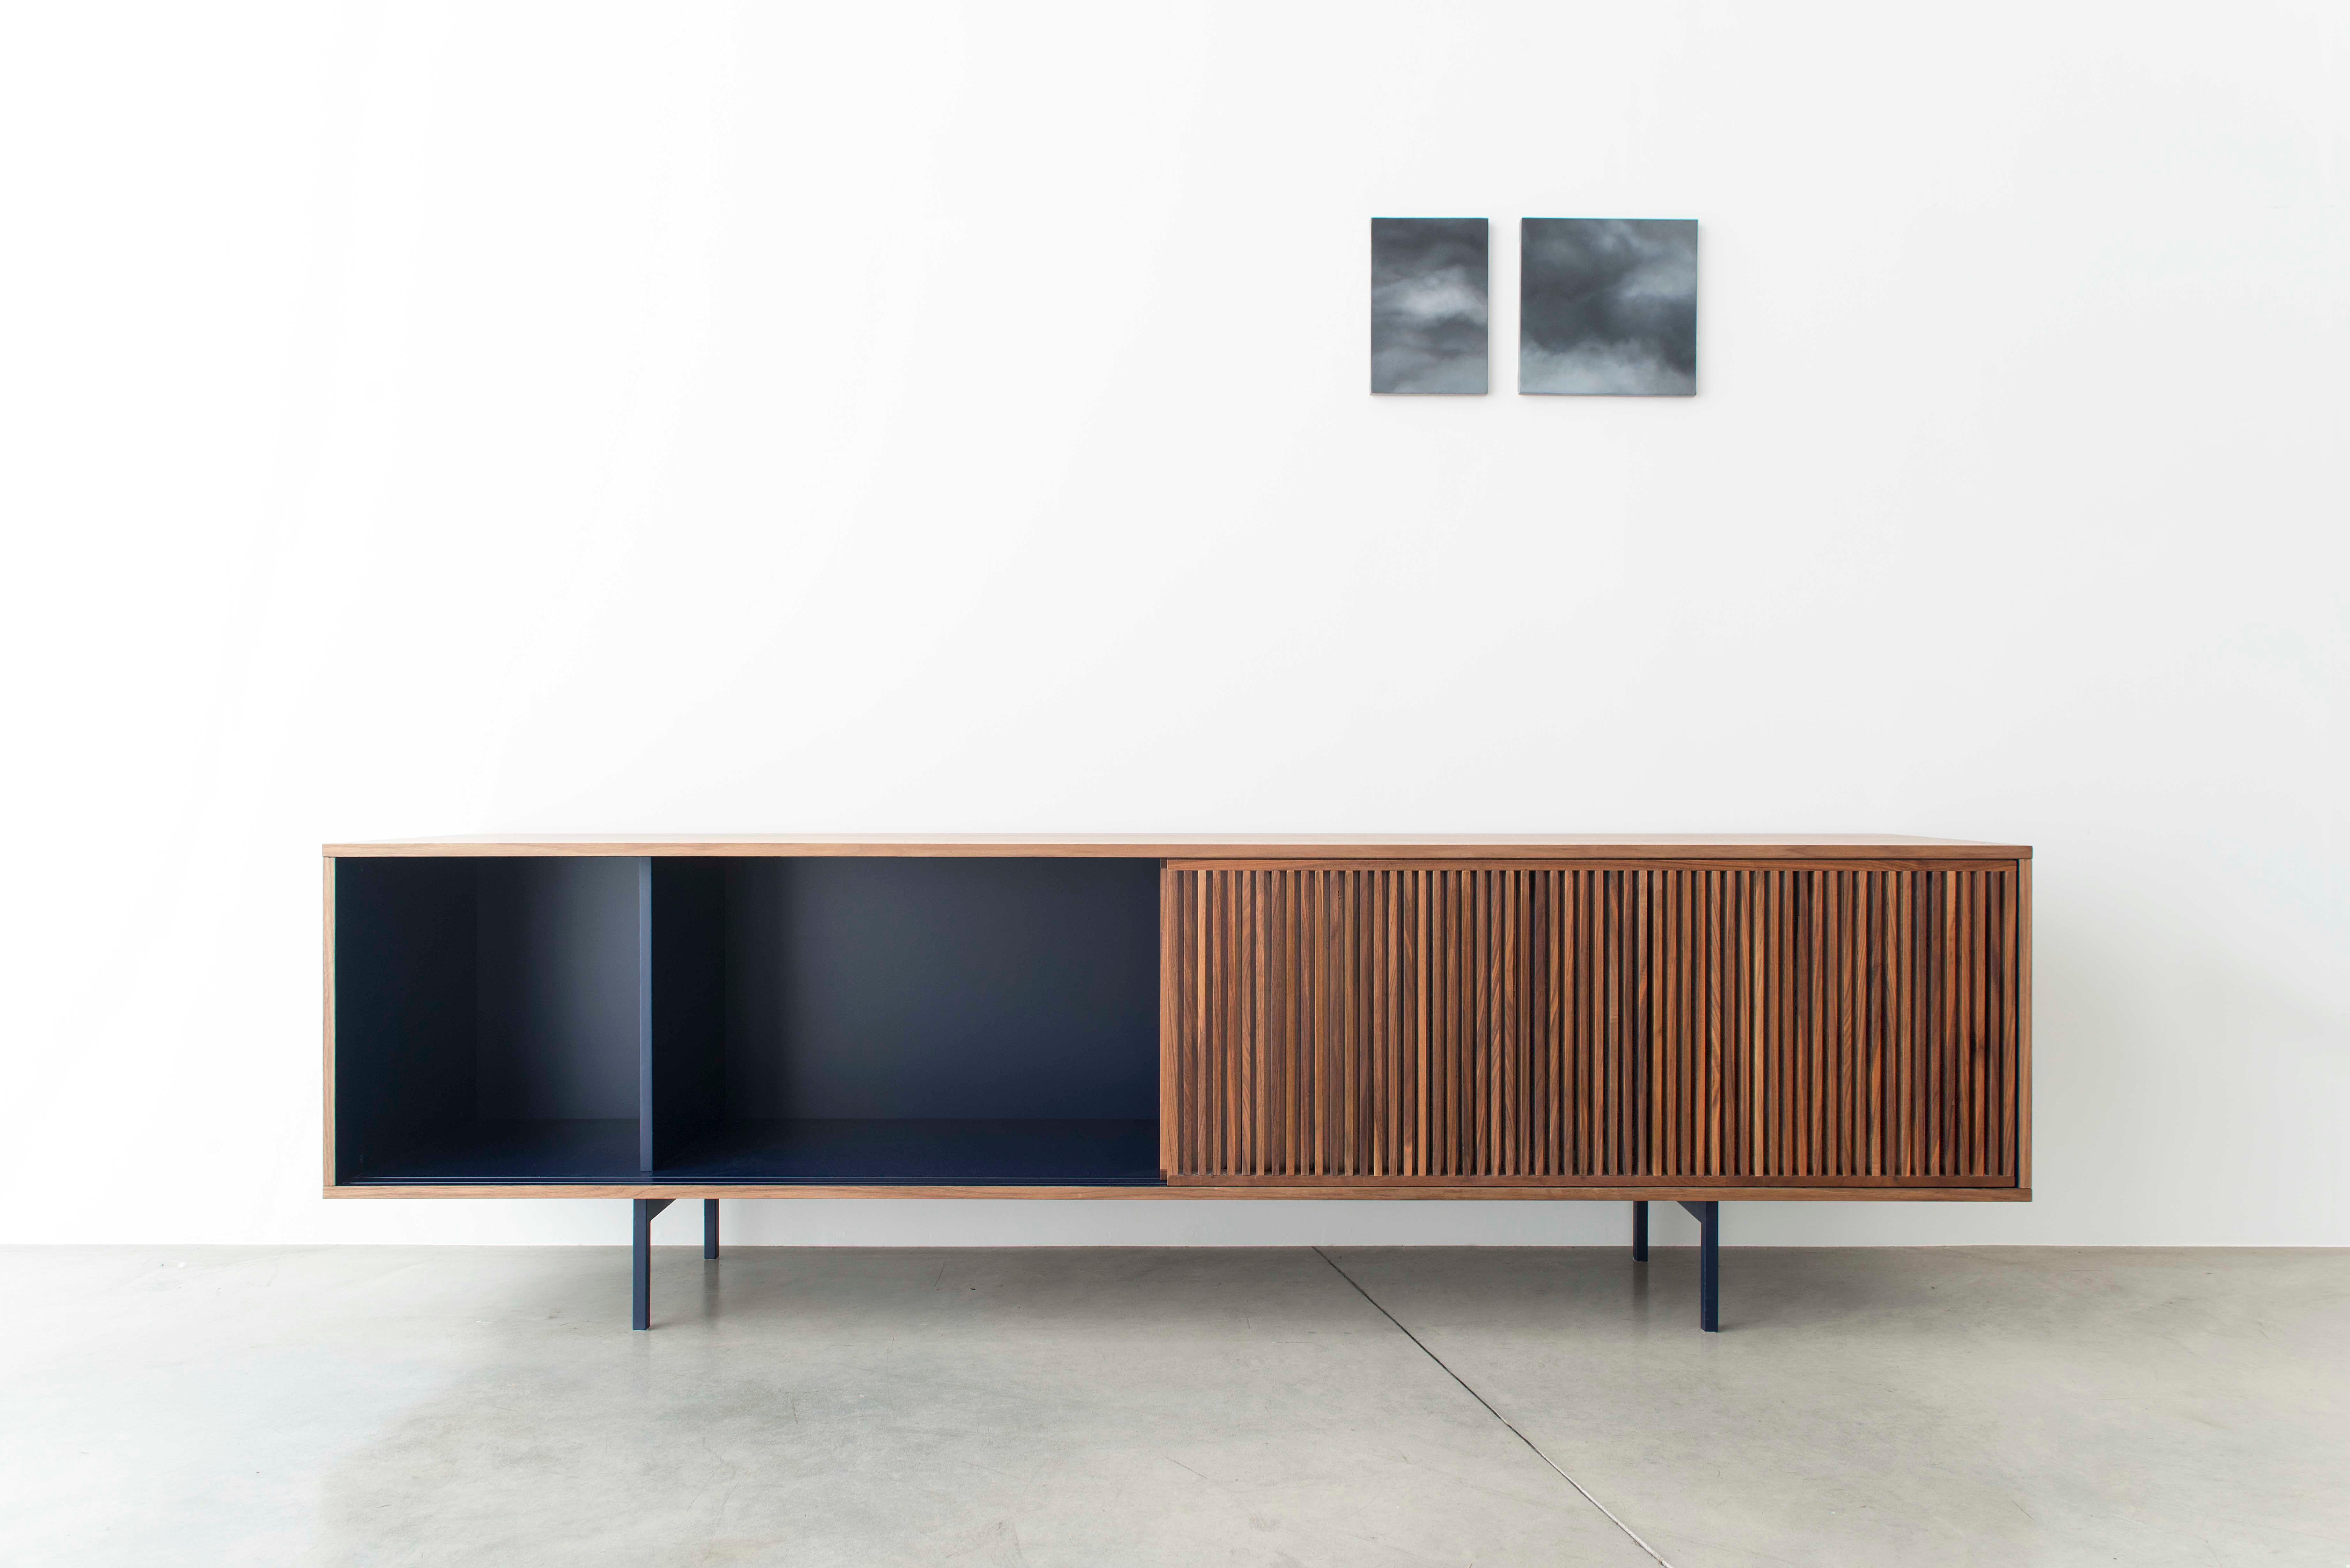 A rectangle with clean, extremely linear shapes, which expresses an essential refinement: the low sideboard is a container in black walnut wood, which hides dark, lacquered shelves and all inside part.
On the front, doors with vertical battens